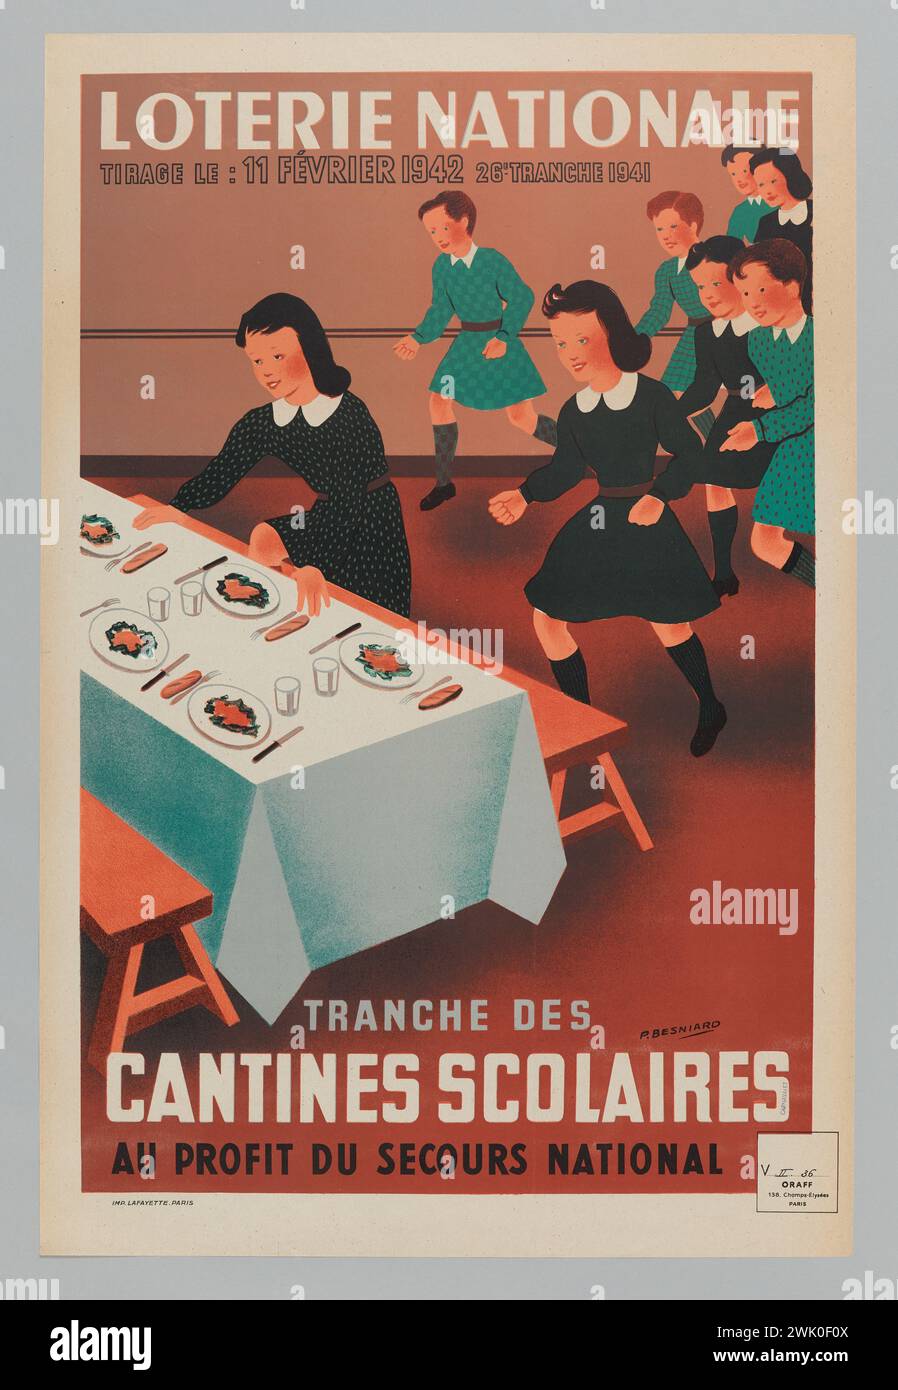 Besniard, P. (N.1890-11-14-D.1977), National Lottery/ Draw on: February 11, 1942 26th tranche 1941/ Slache of school canteens/ for the benefit of the National Rescue (registered title (letter)), 1941 . Color lithography. Carnavalet museum, history of Paris. Stock Photo